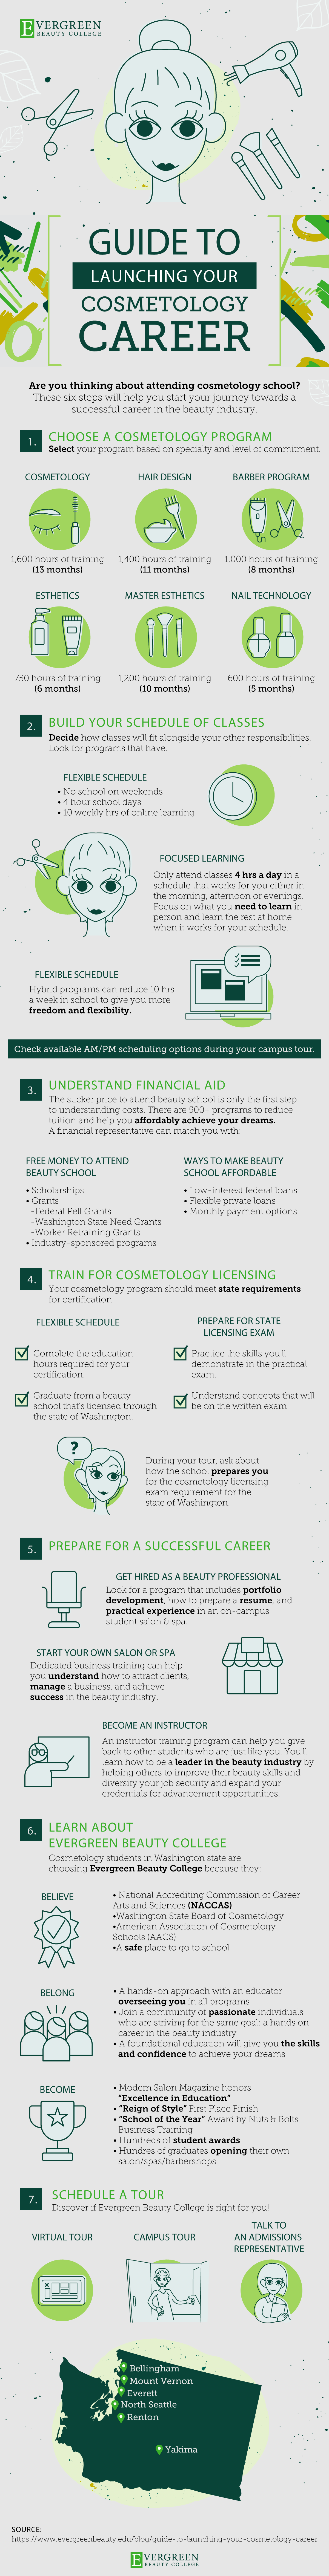 Guide-to-Launching-Your-Cosmetology-Career.